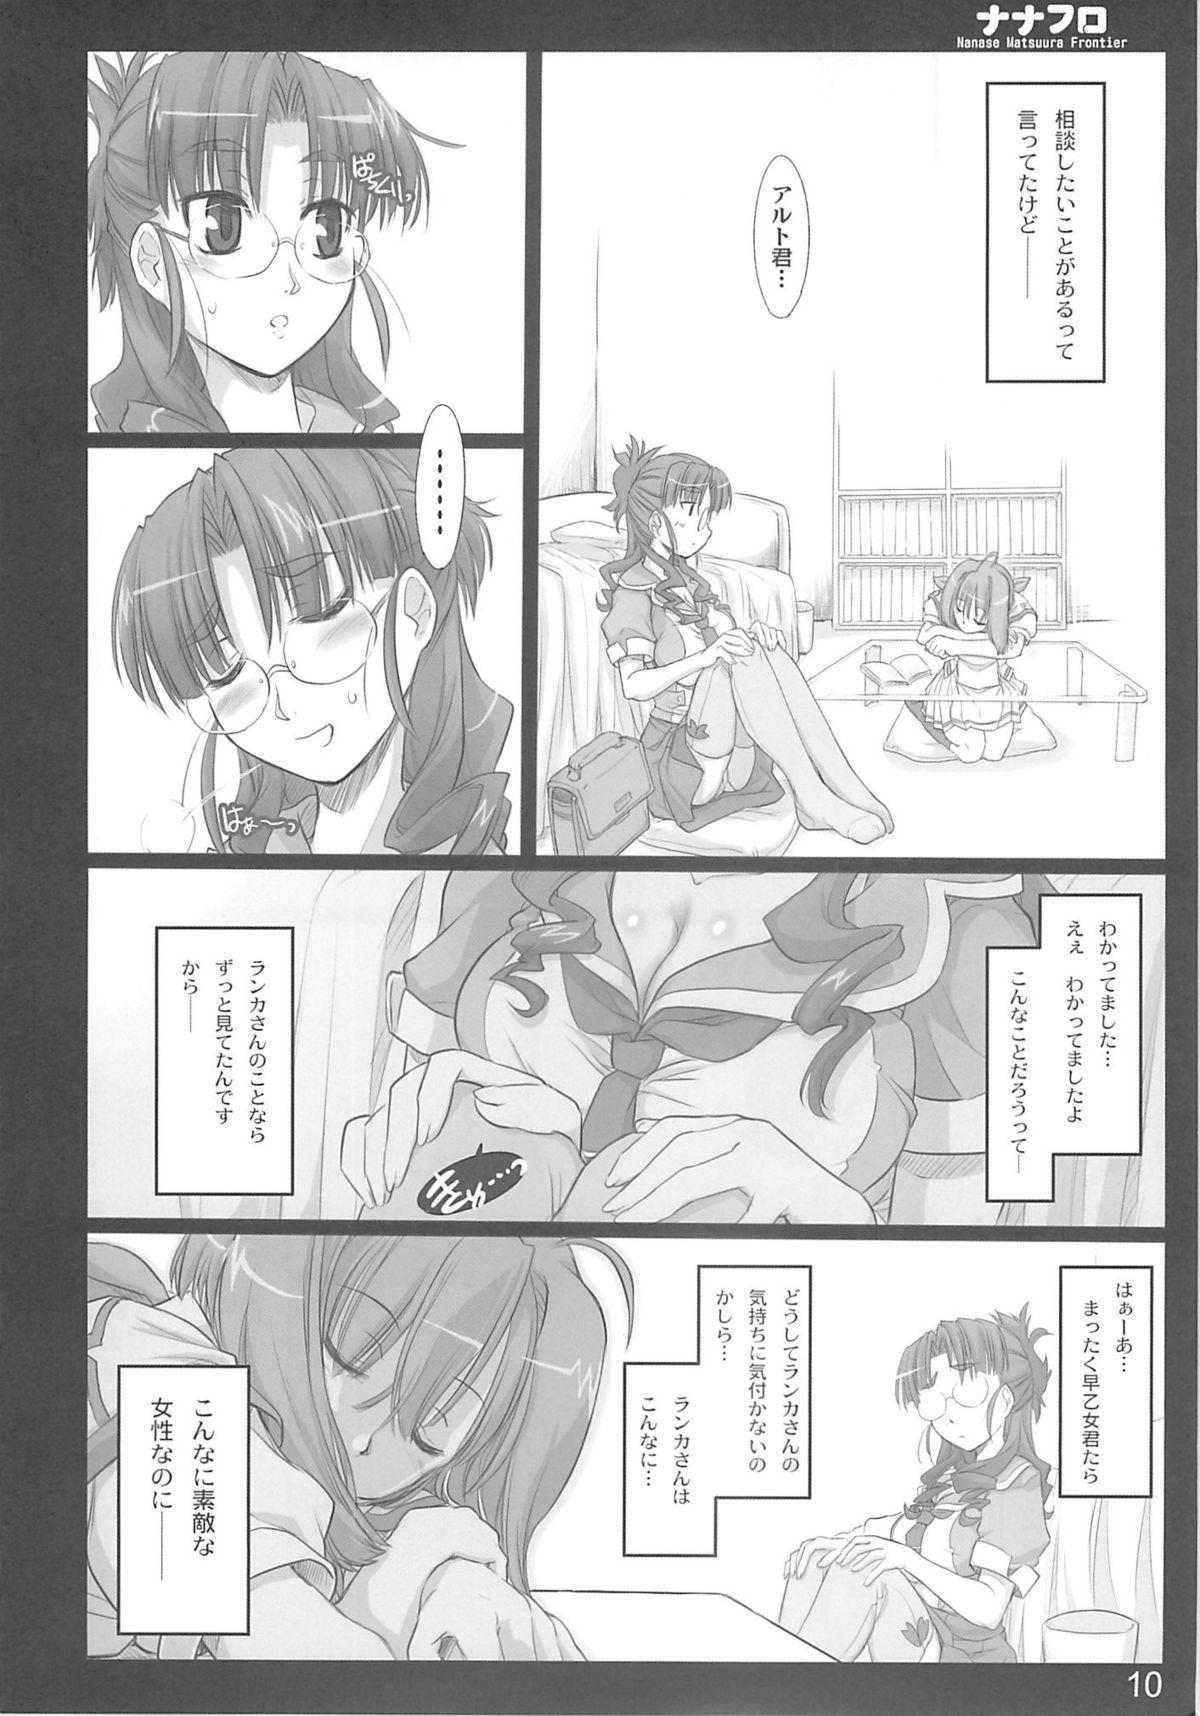 Fingering Nana Fro - Macross frontier Behind - Page 9